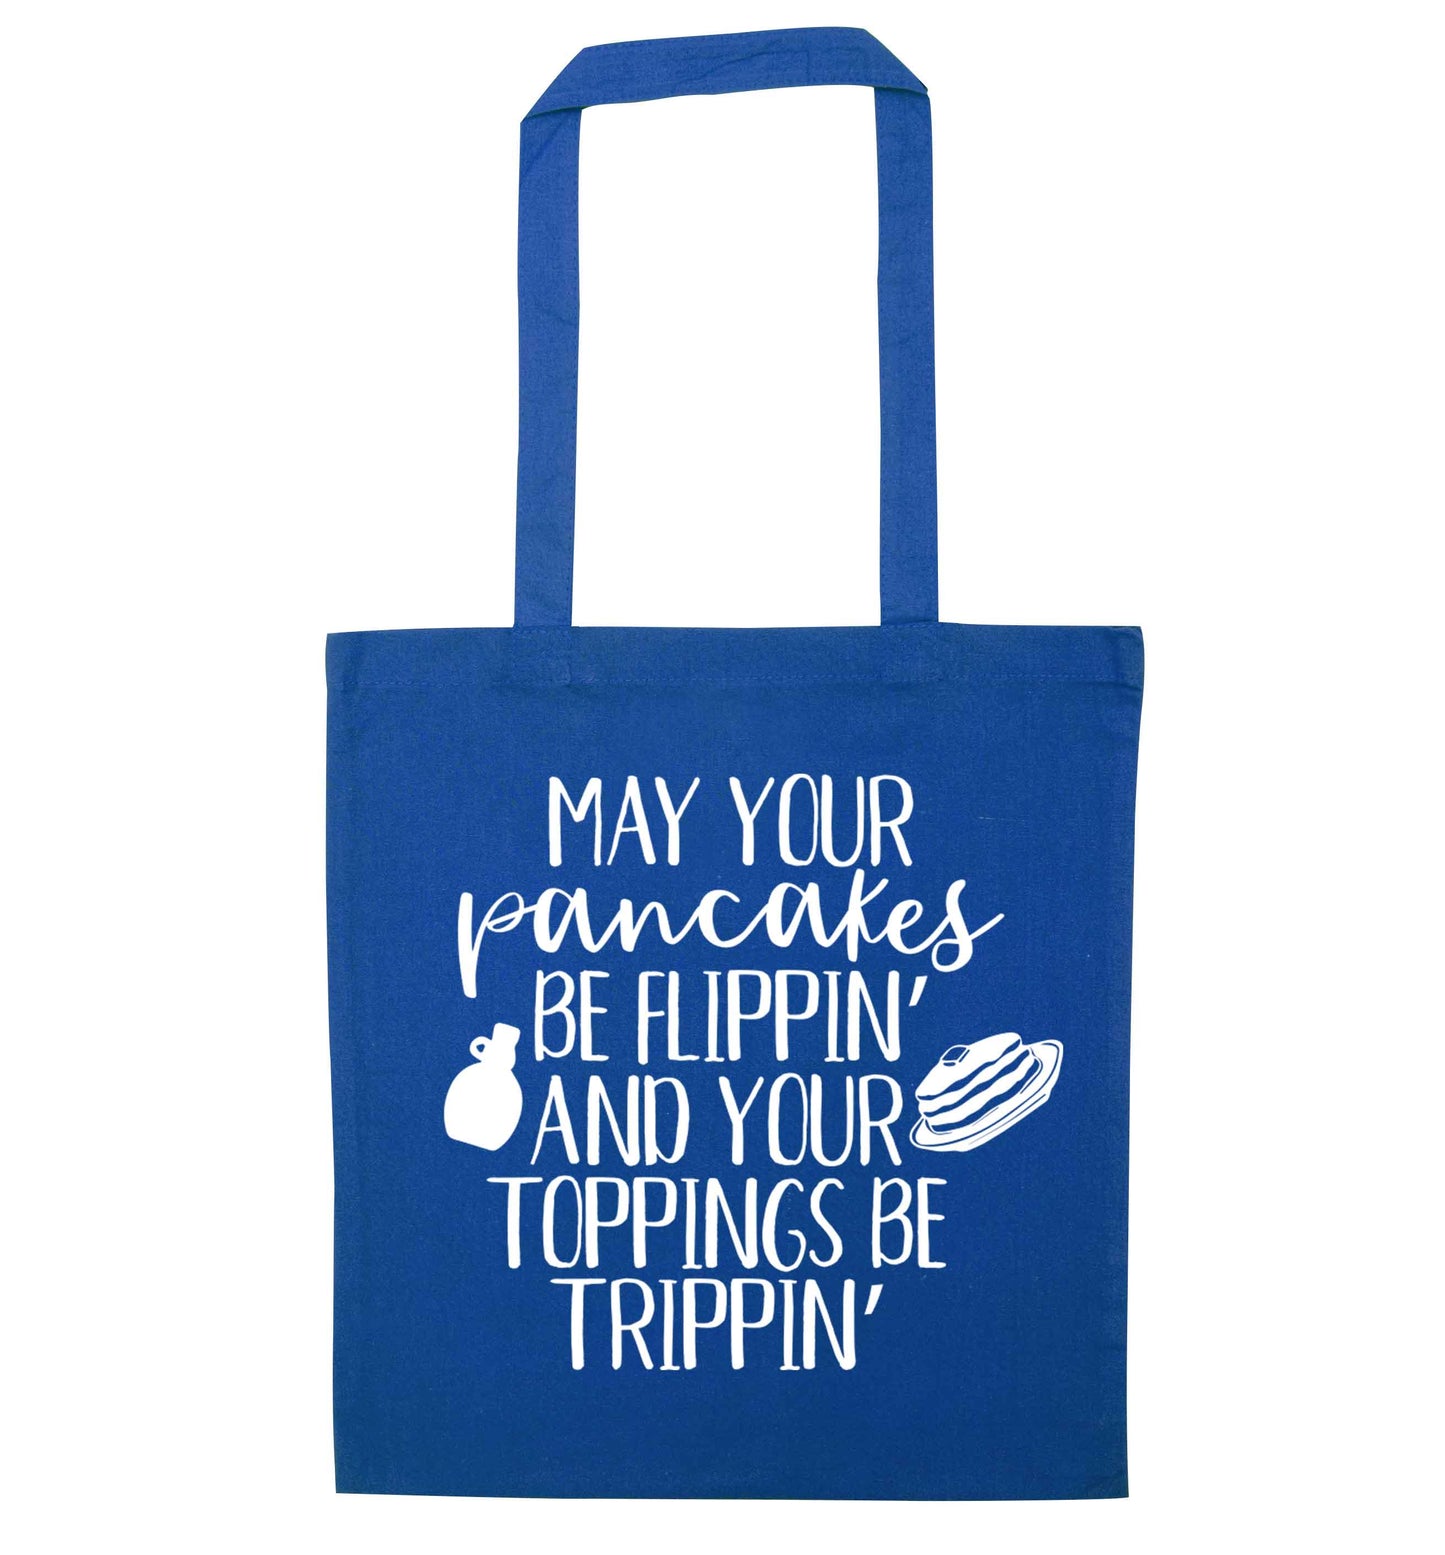 May your pancakes be flippin' and your toppings be trippin' blue tote bag